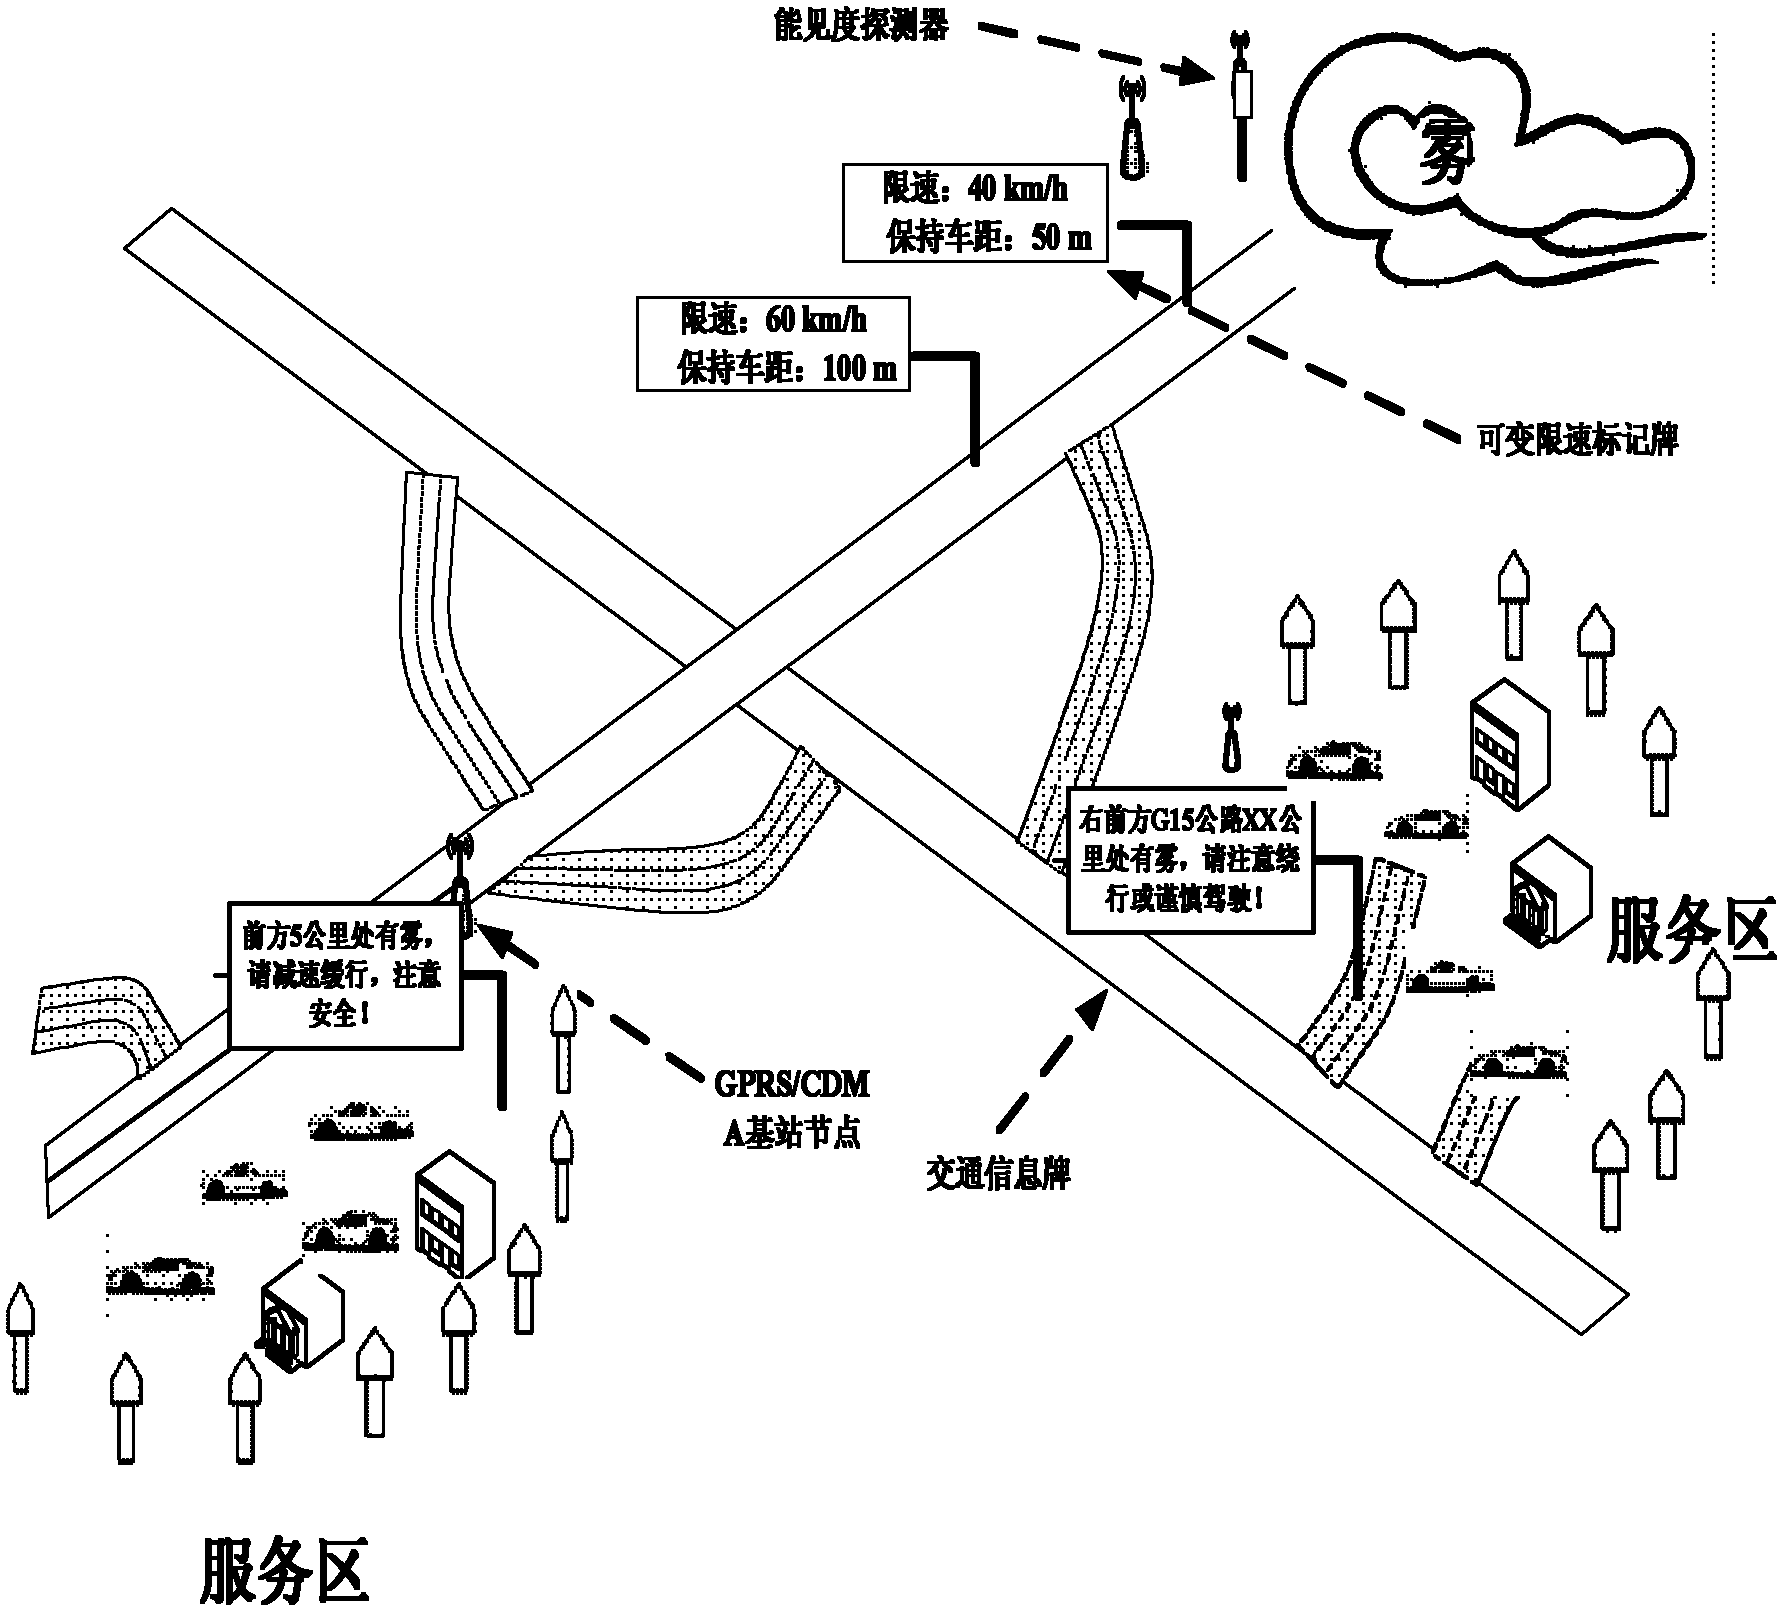 Highway intelligent aided guidance system based on GPRS (General Packet Radio Service)/CDMA (Code Division Multiple Access) wireless network and control method thereof